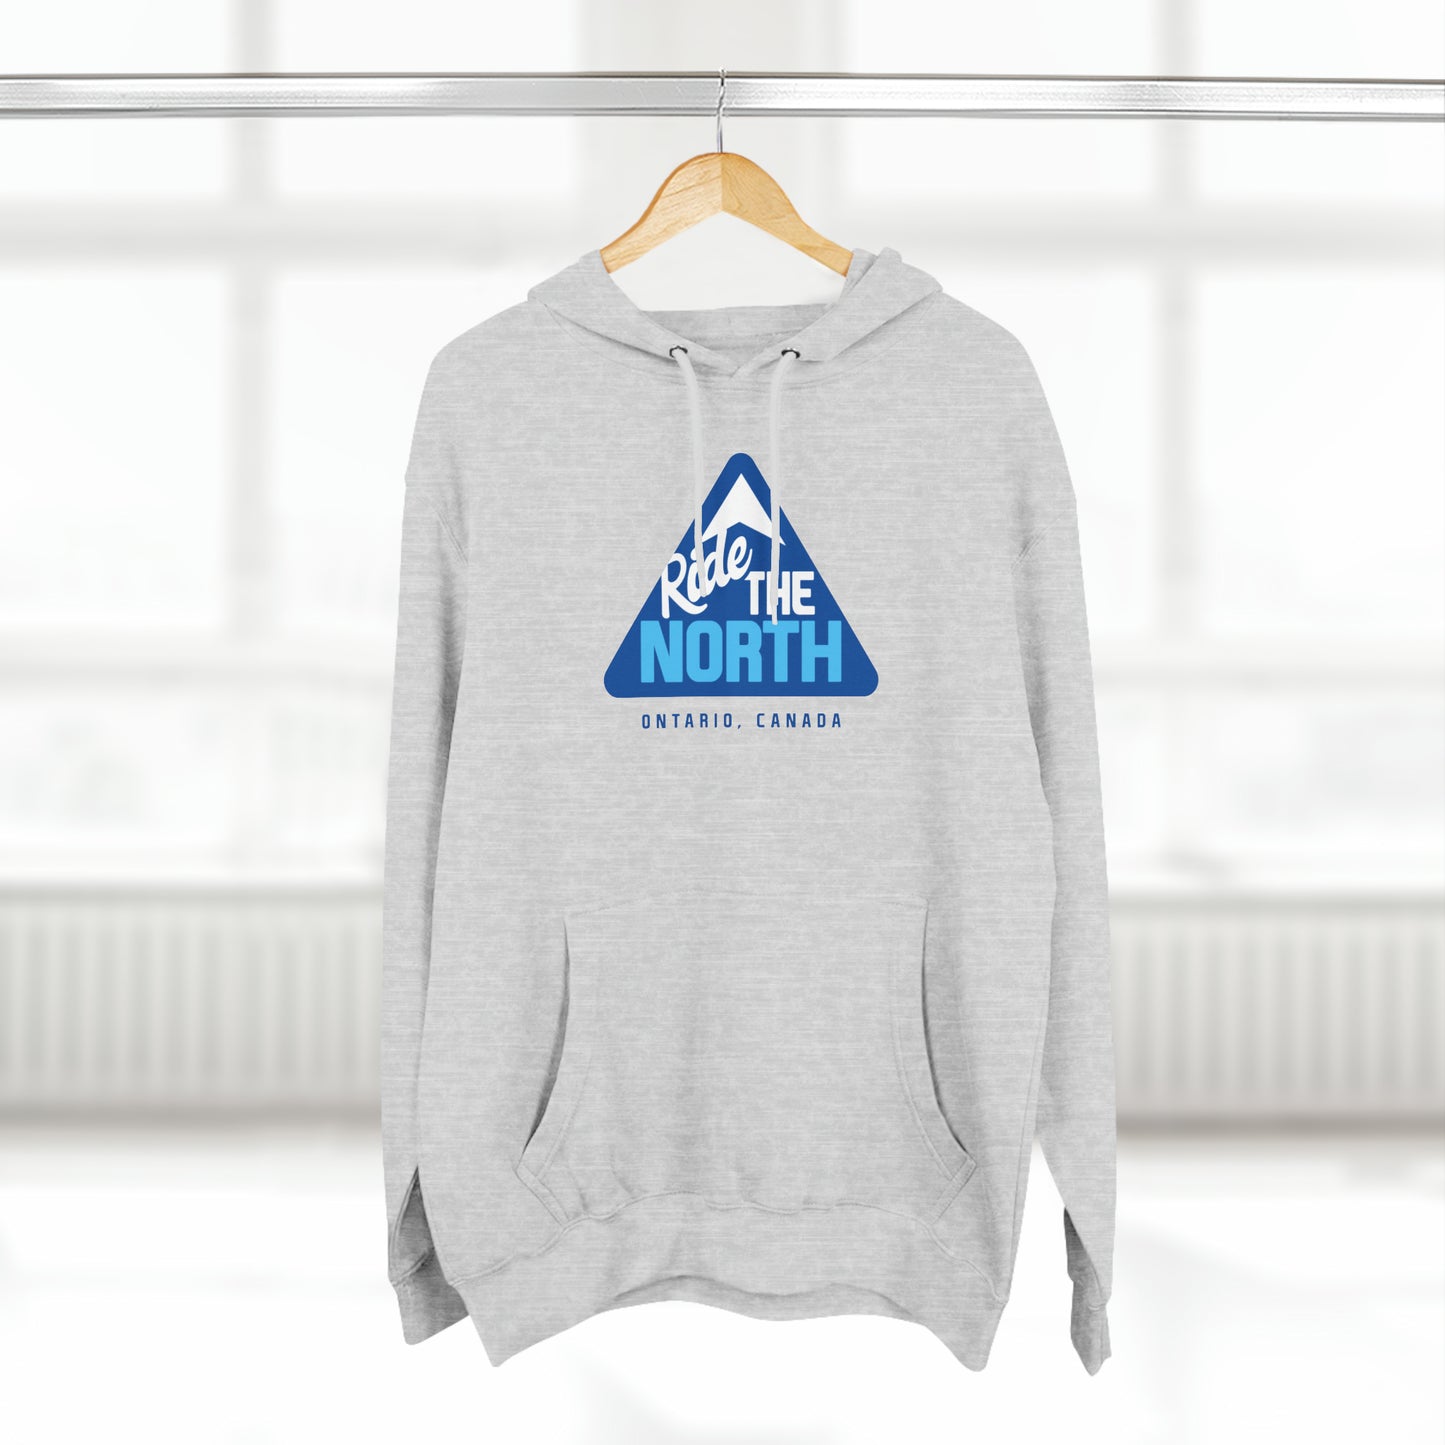 Ride The North Hoodie